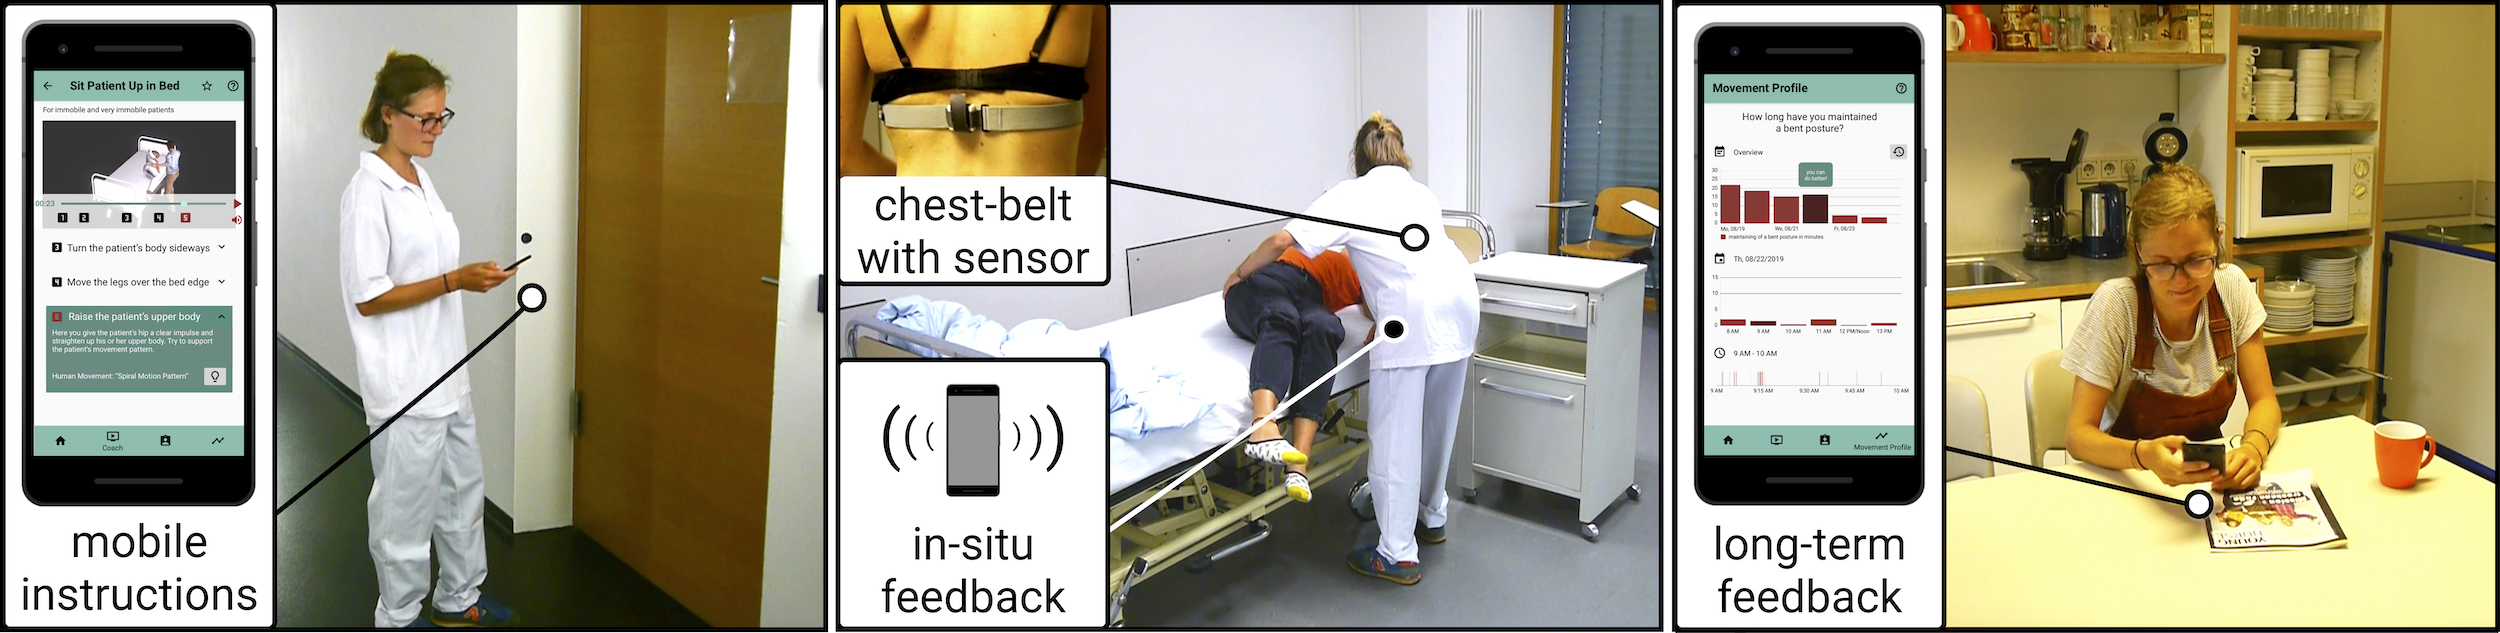 NurseCare: Design and ‘In-The-Wild’ Evaluation of a Mobile System to Promote the Ergonomic Transfer of Patients